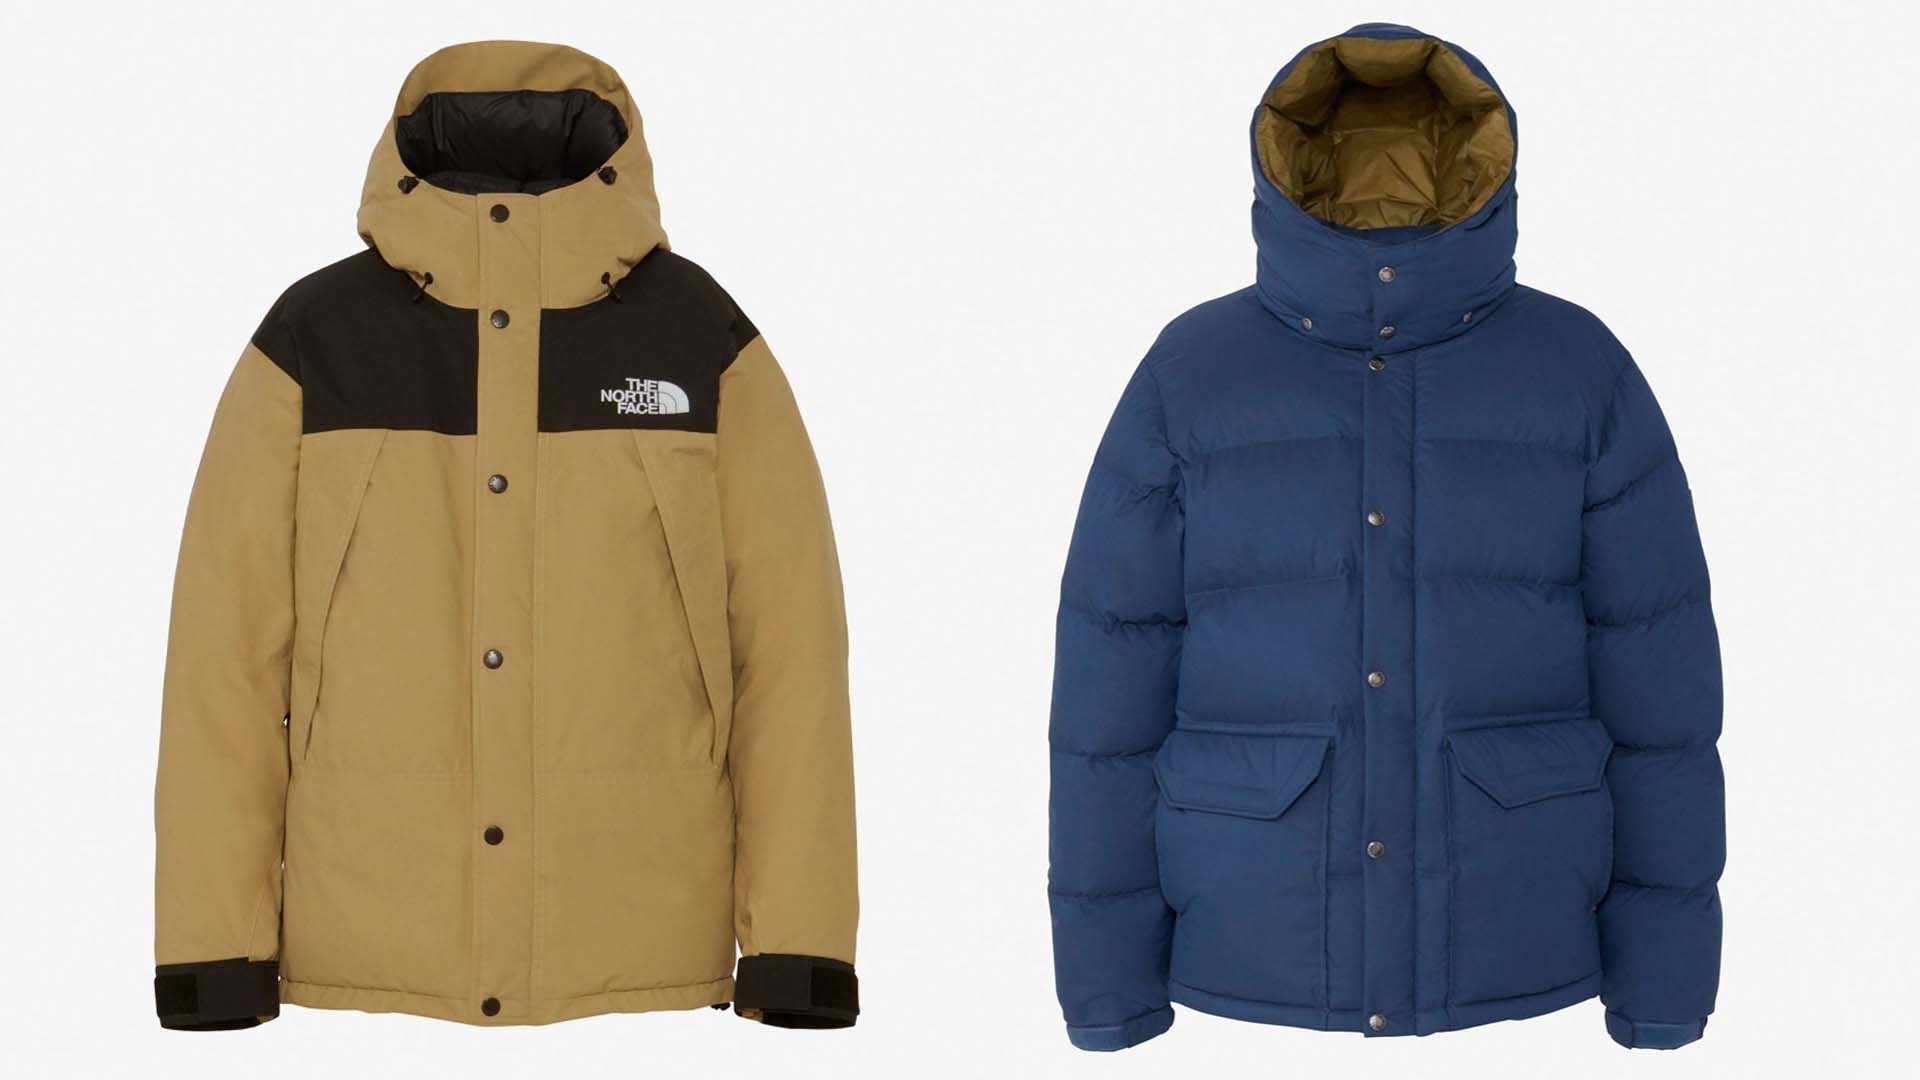 「THE NORTH FACE」ハイスペックモデル「Mountain Down